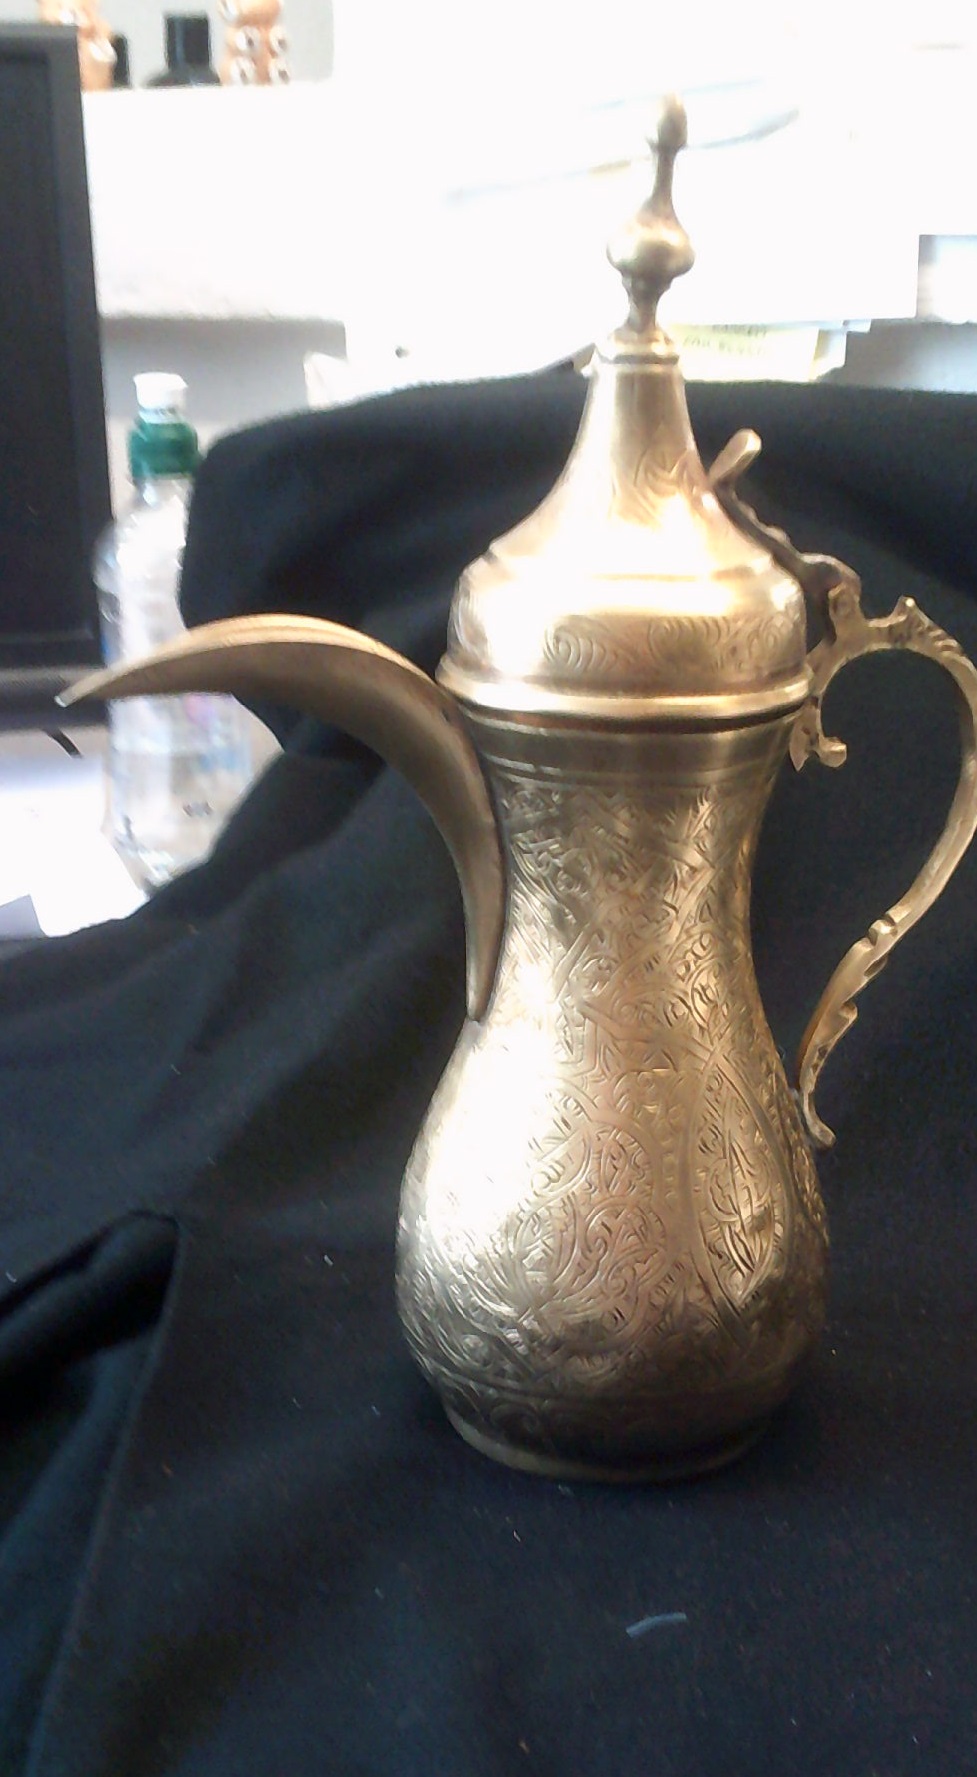 Vintage Ornamental Indian Style Brass Teapot - Image 2 of 2